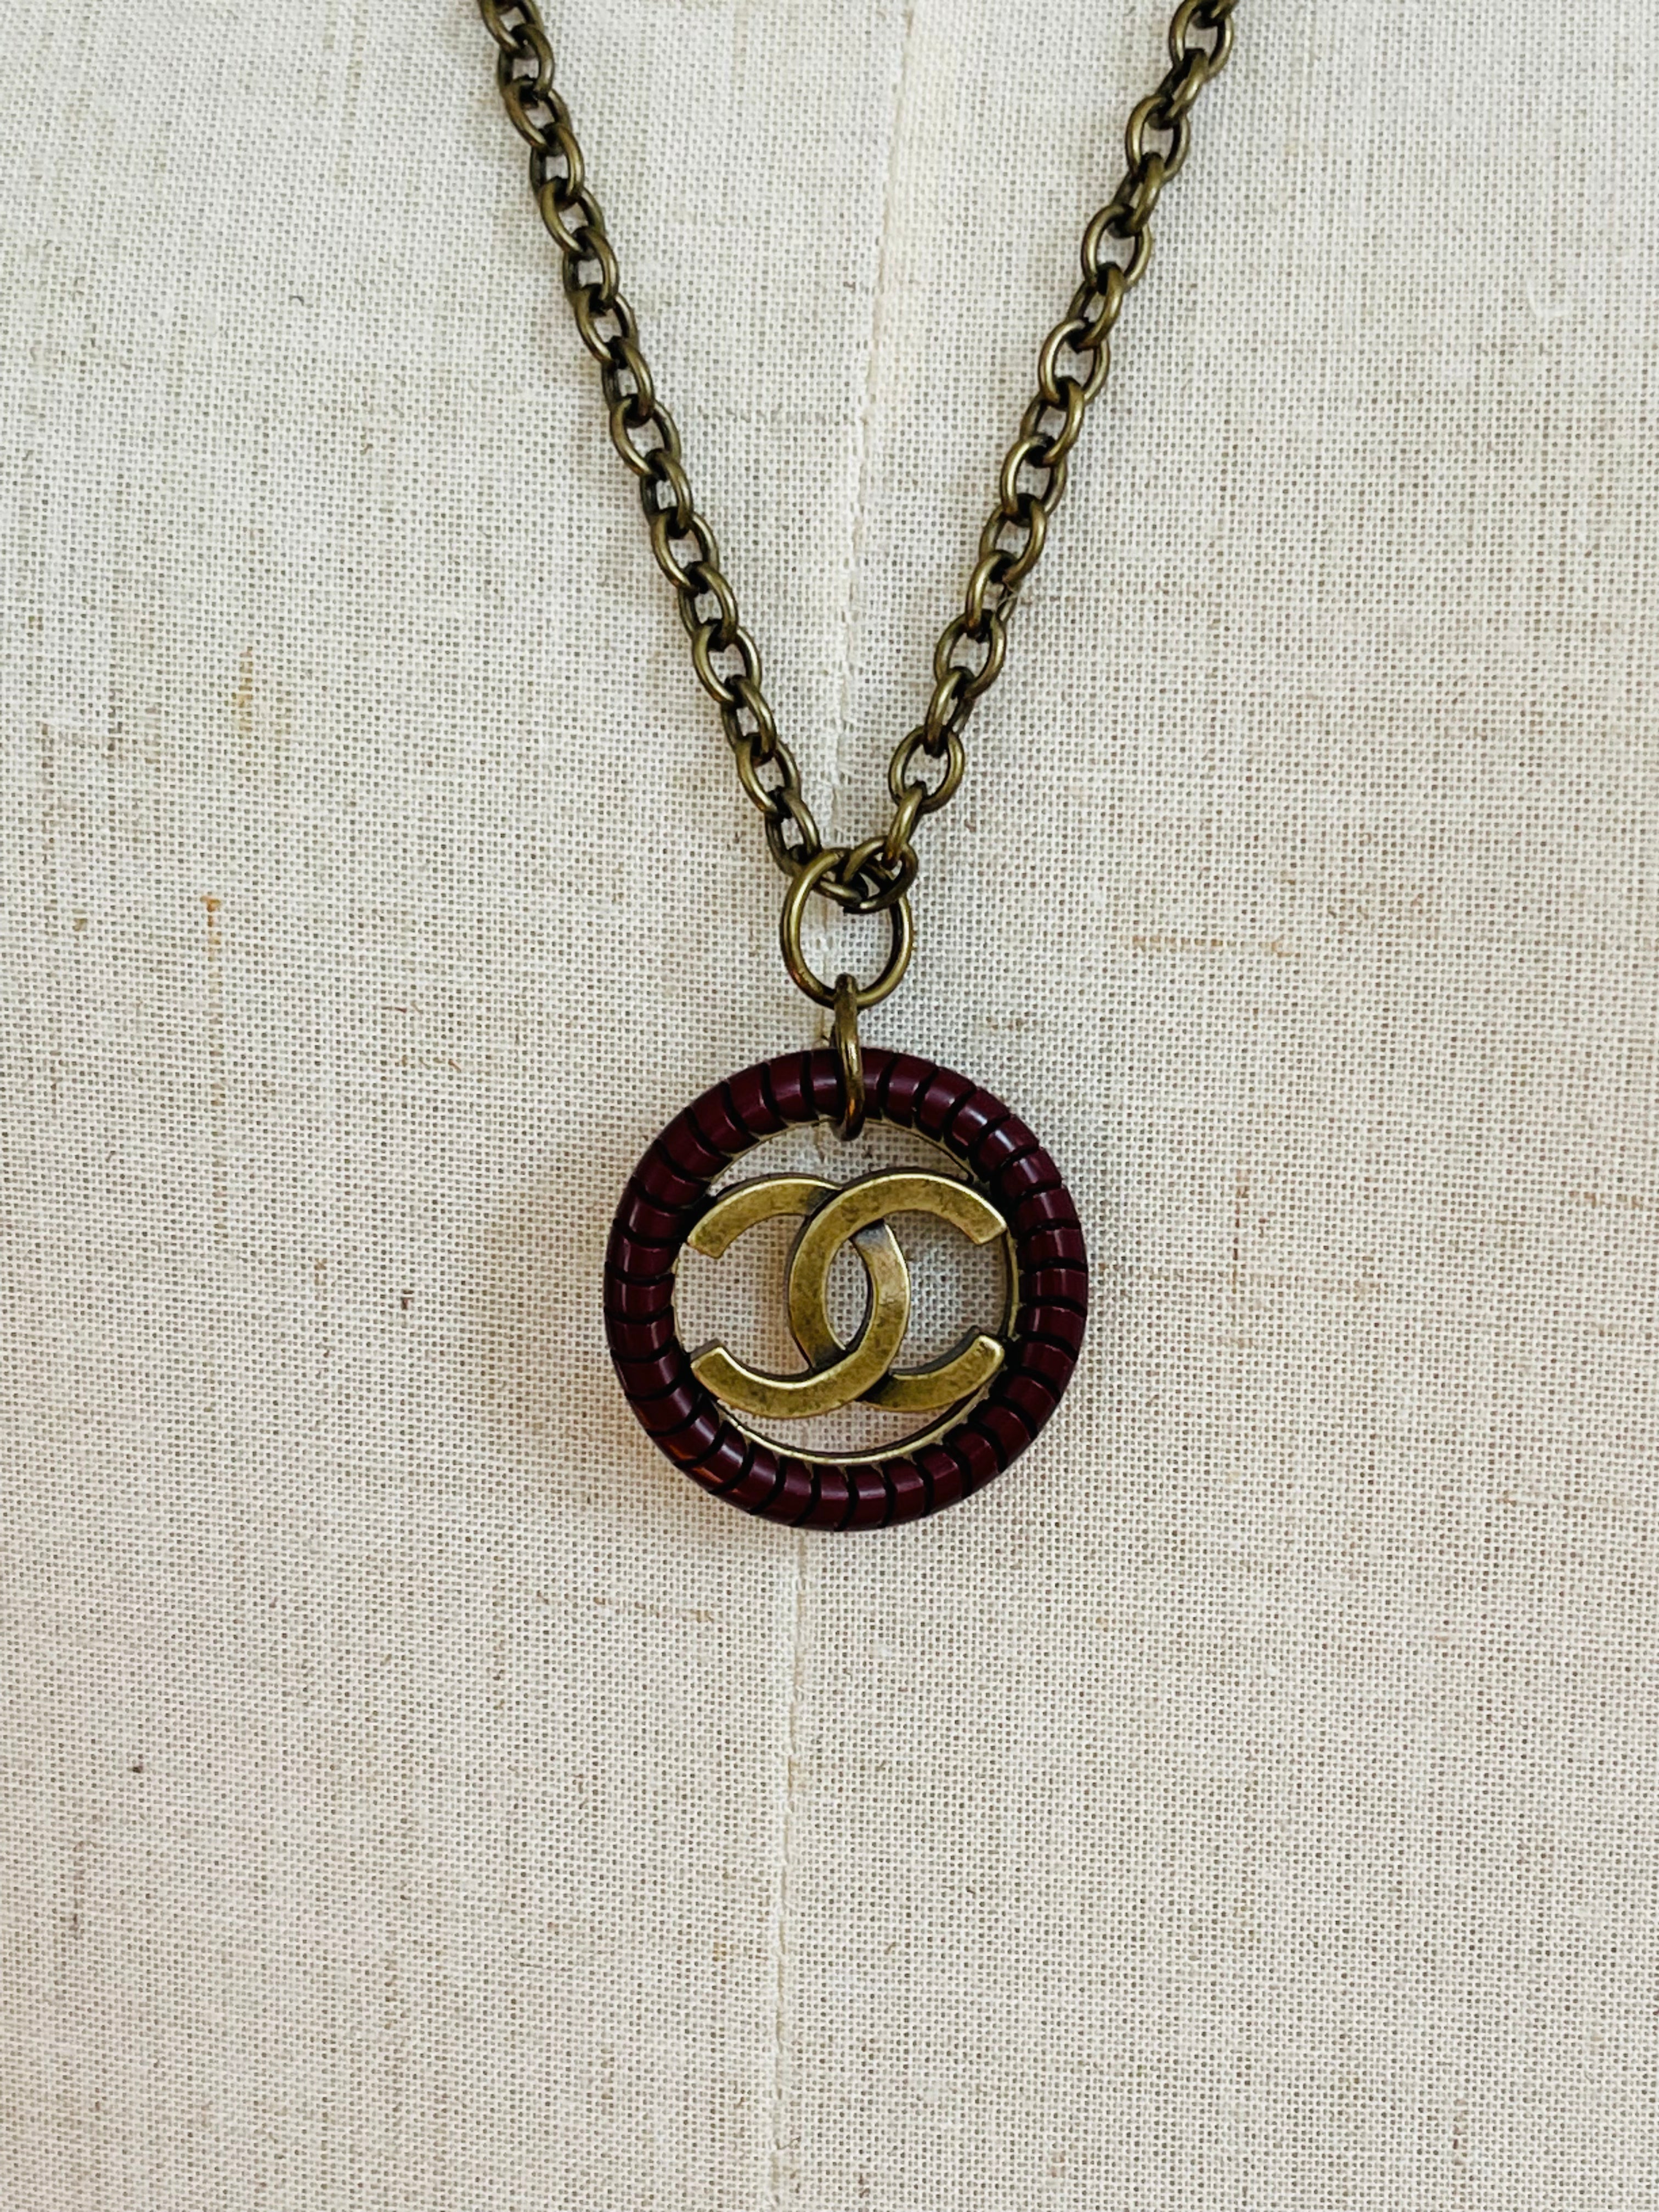 Authentic Chanel Leather & Brass Charm on Pendant Necklace